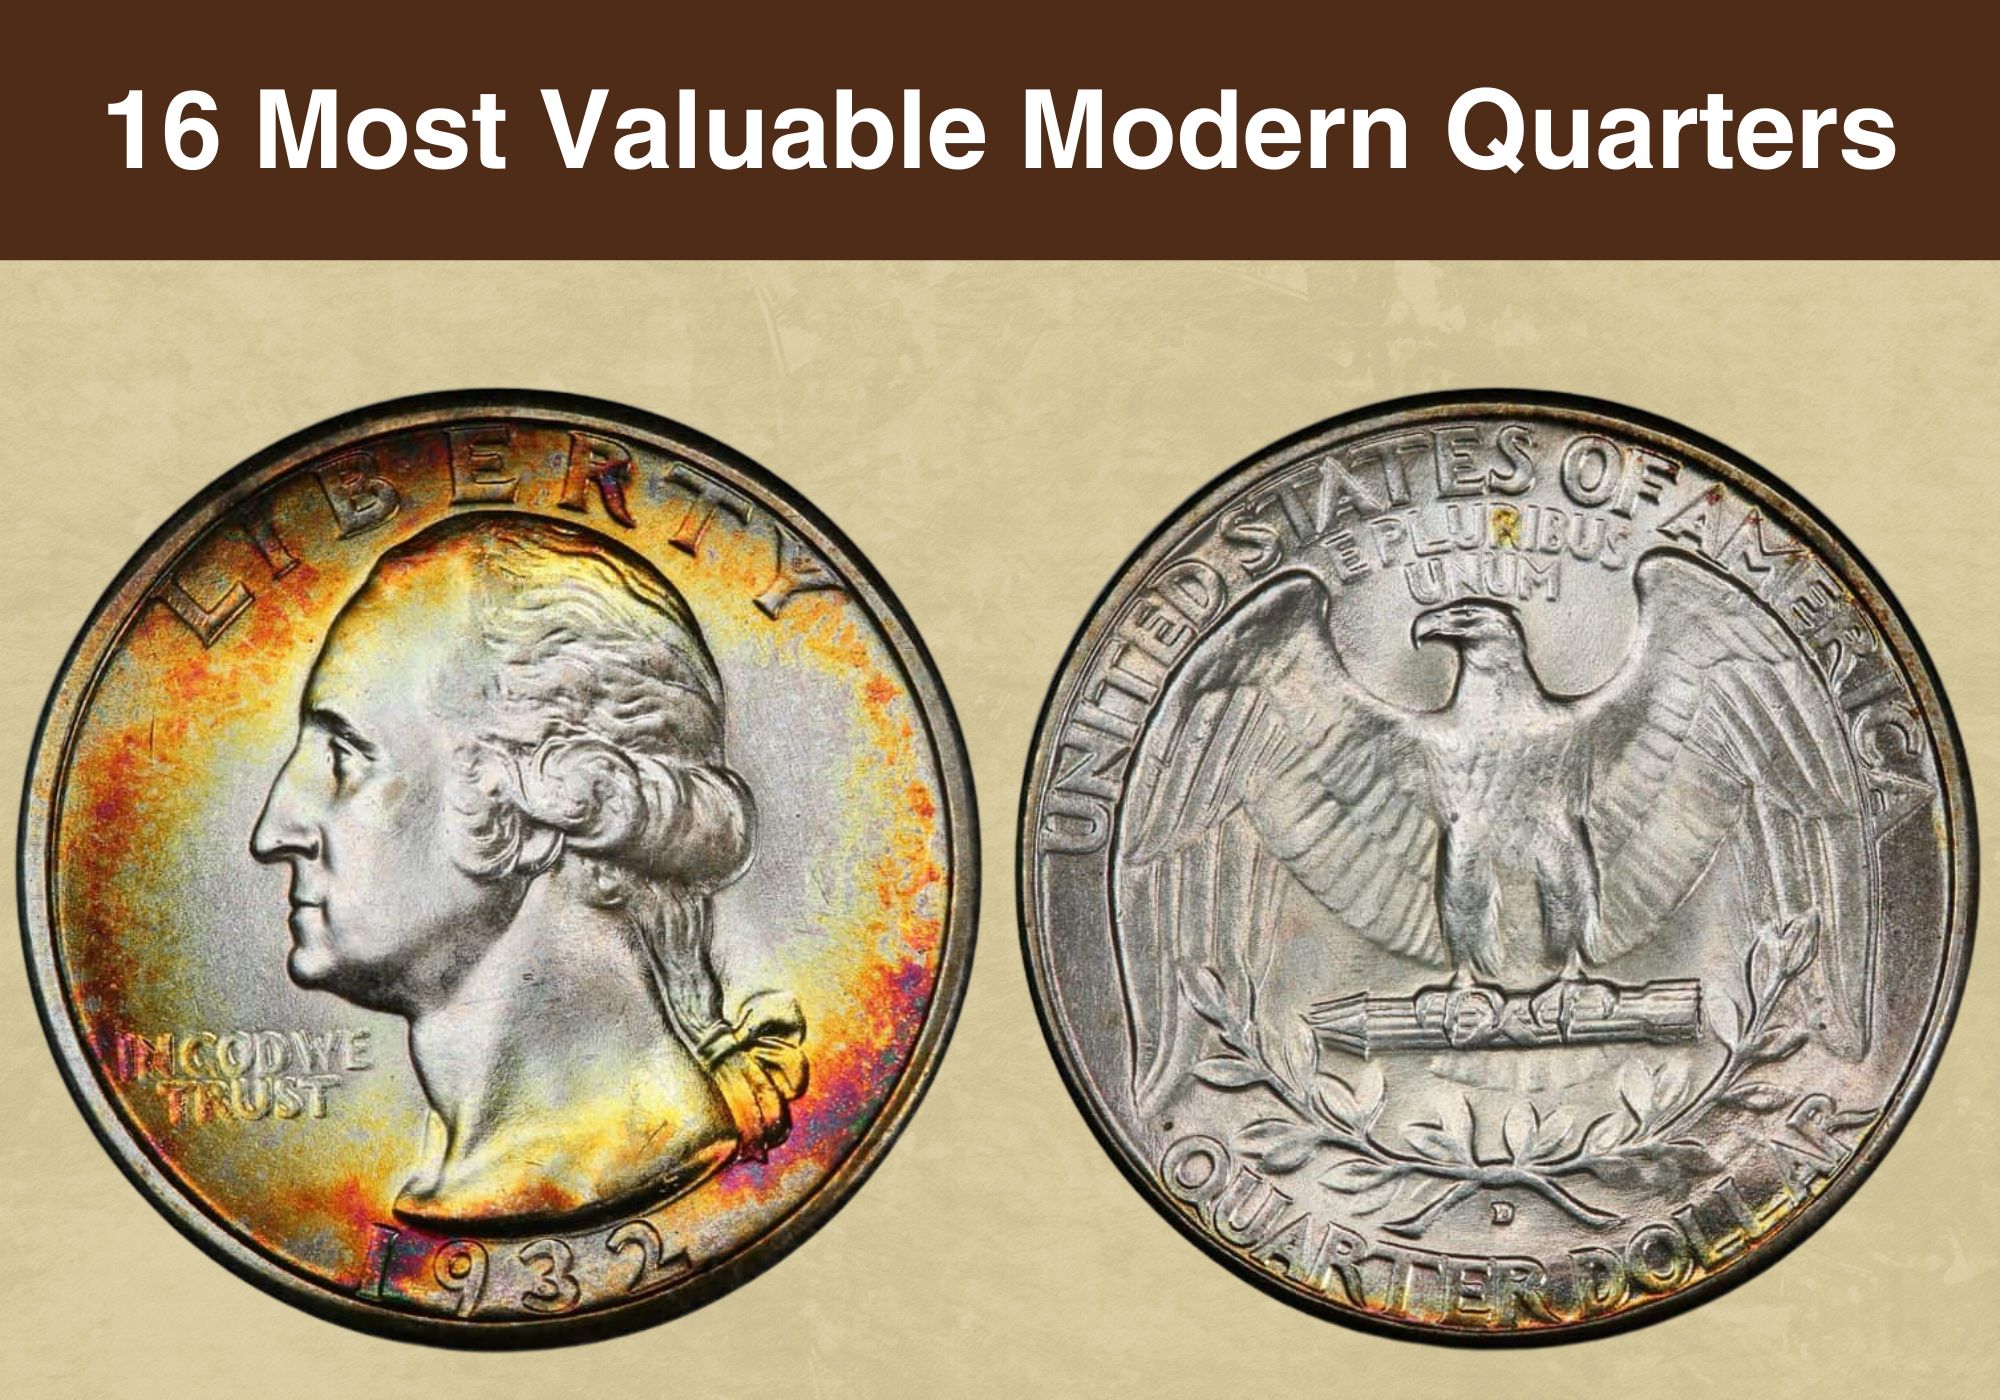 16 Most Valuable Modern Quarter Coins Worth Money (With Pictures)